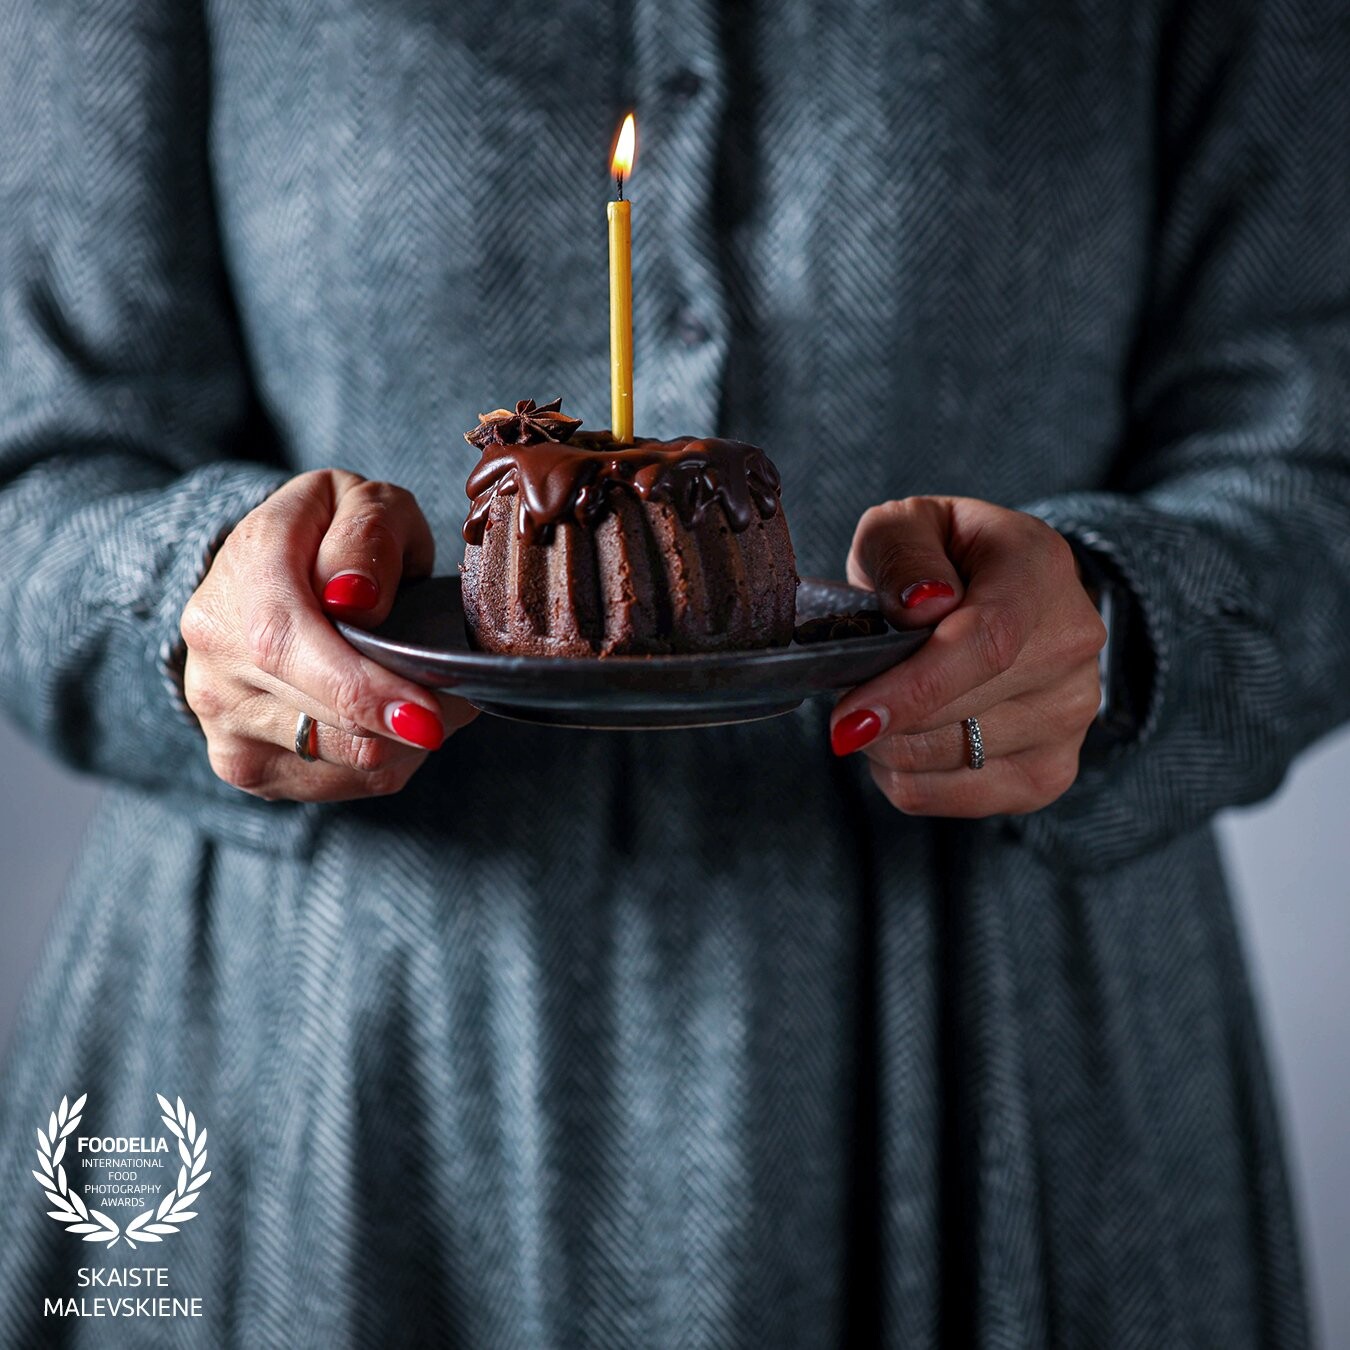 This is a mini chocolate bundt cake and a sweet little candle and me making my 40th birthday wish. With the help of my husband and my elder son I was able to freeze the moment.